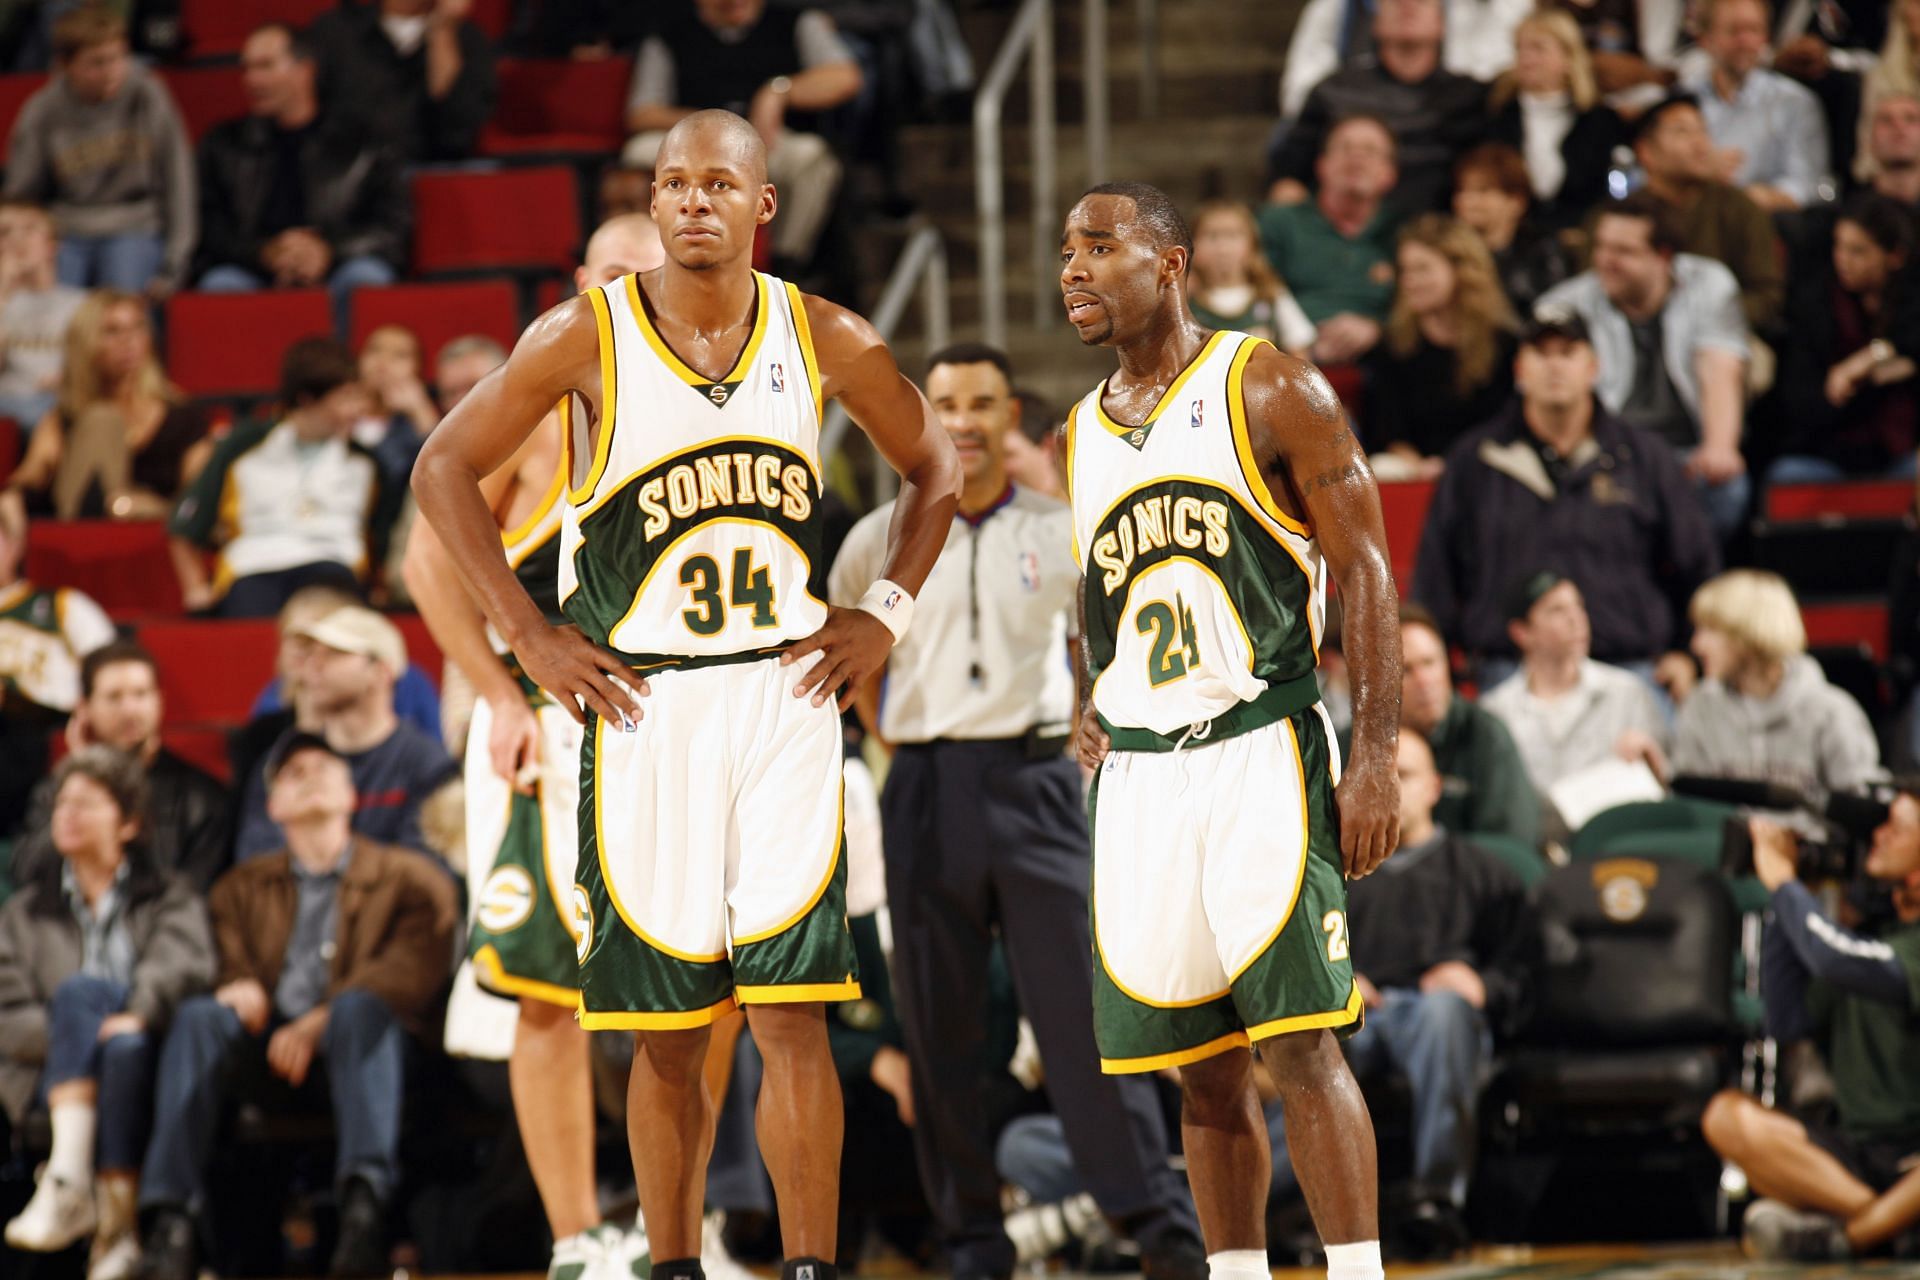 Ray Allen (left) and Mateen Cleaves of the Seattle Sonics in 2005